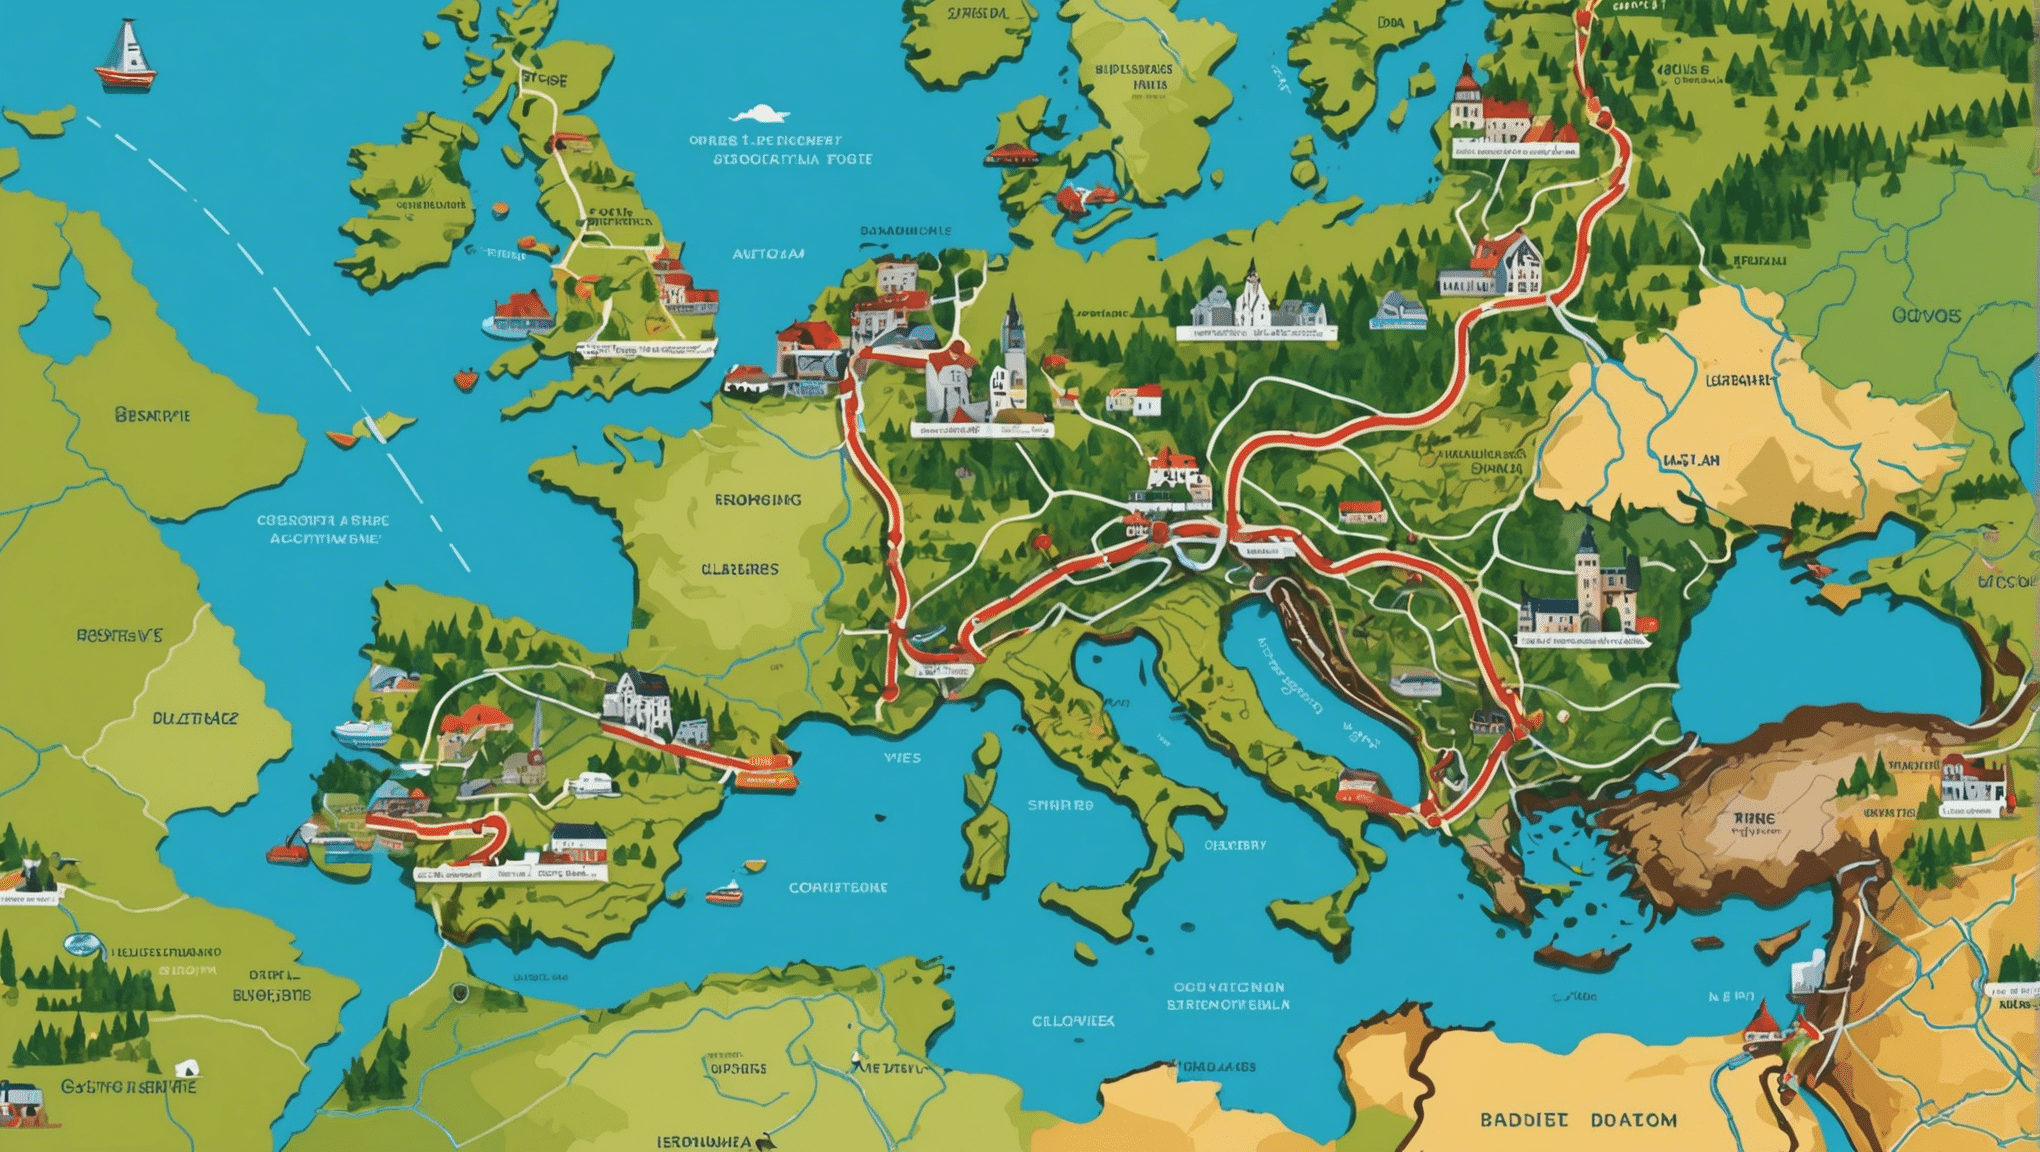 discover the most beautiful cycling routes across Europe and set off on an adventure along the continent's magnificent landscapes.